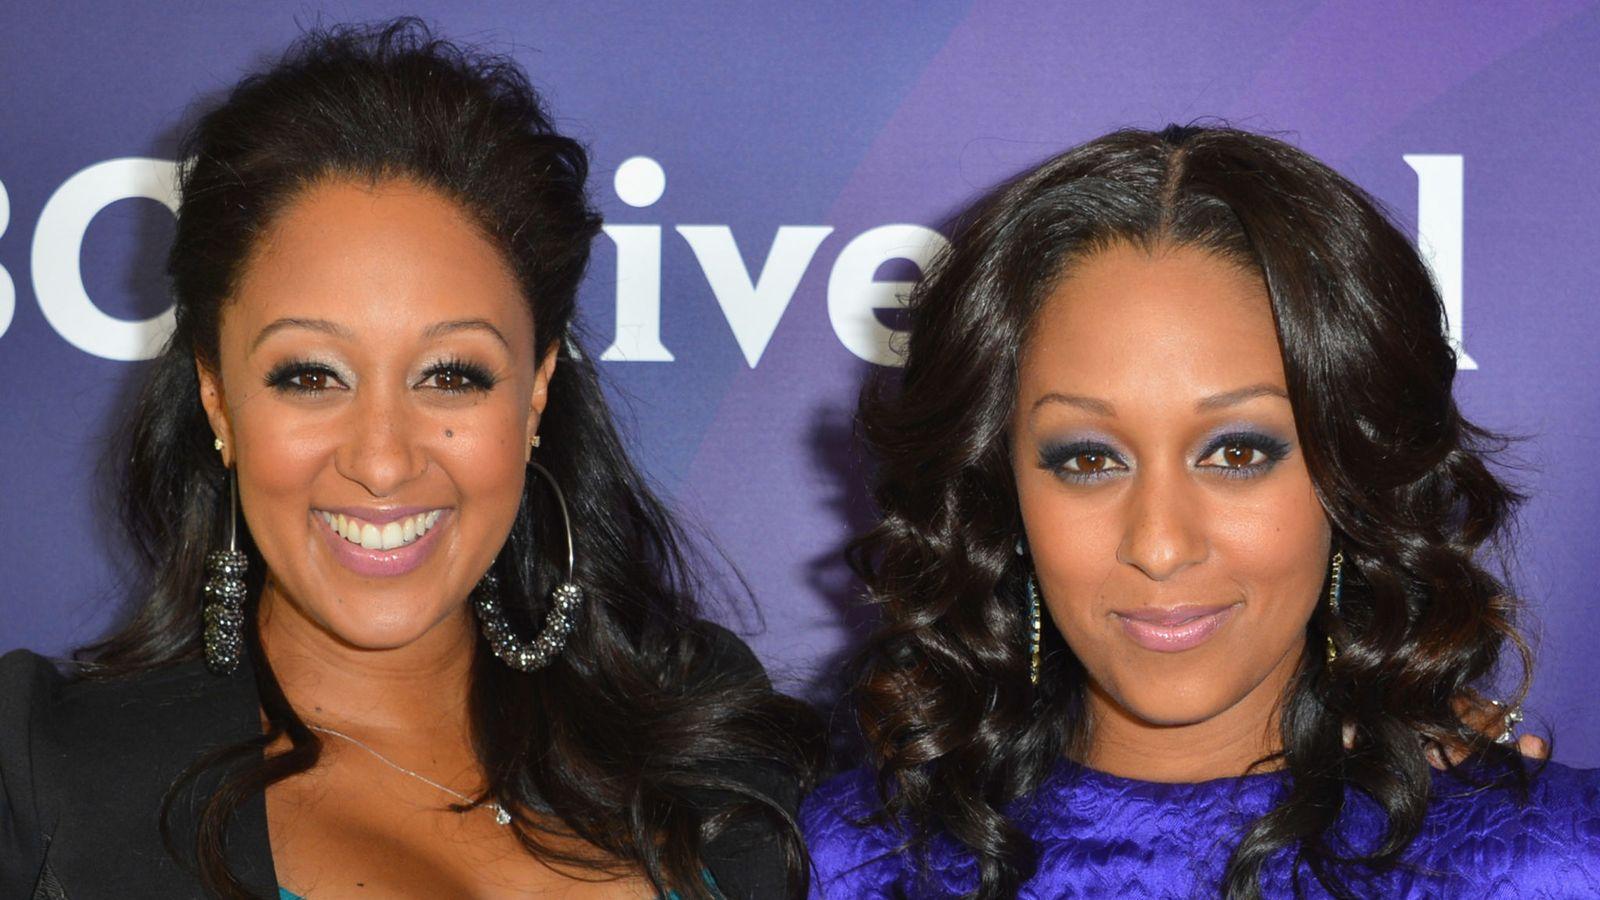 This Is Amazing!' Sister, Sister Star Tamera Mowry Housley